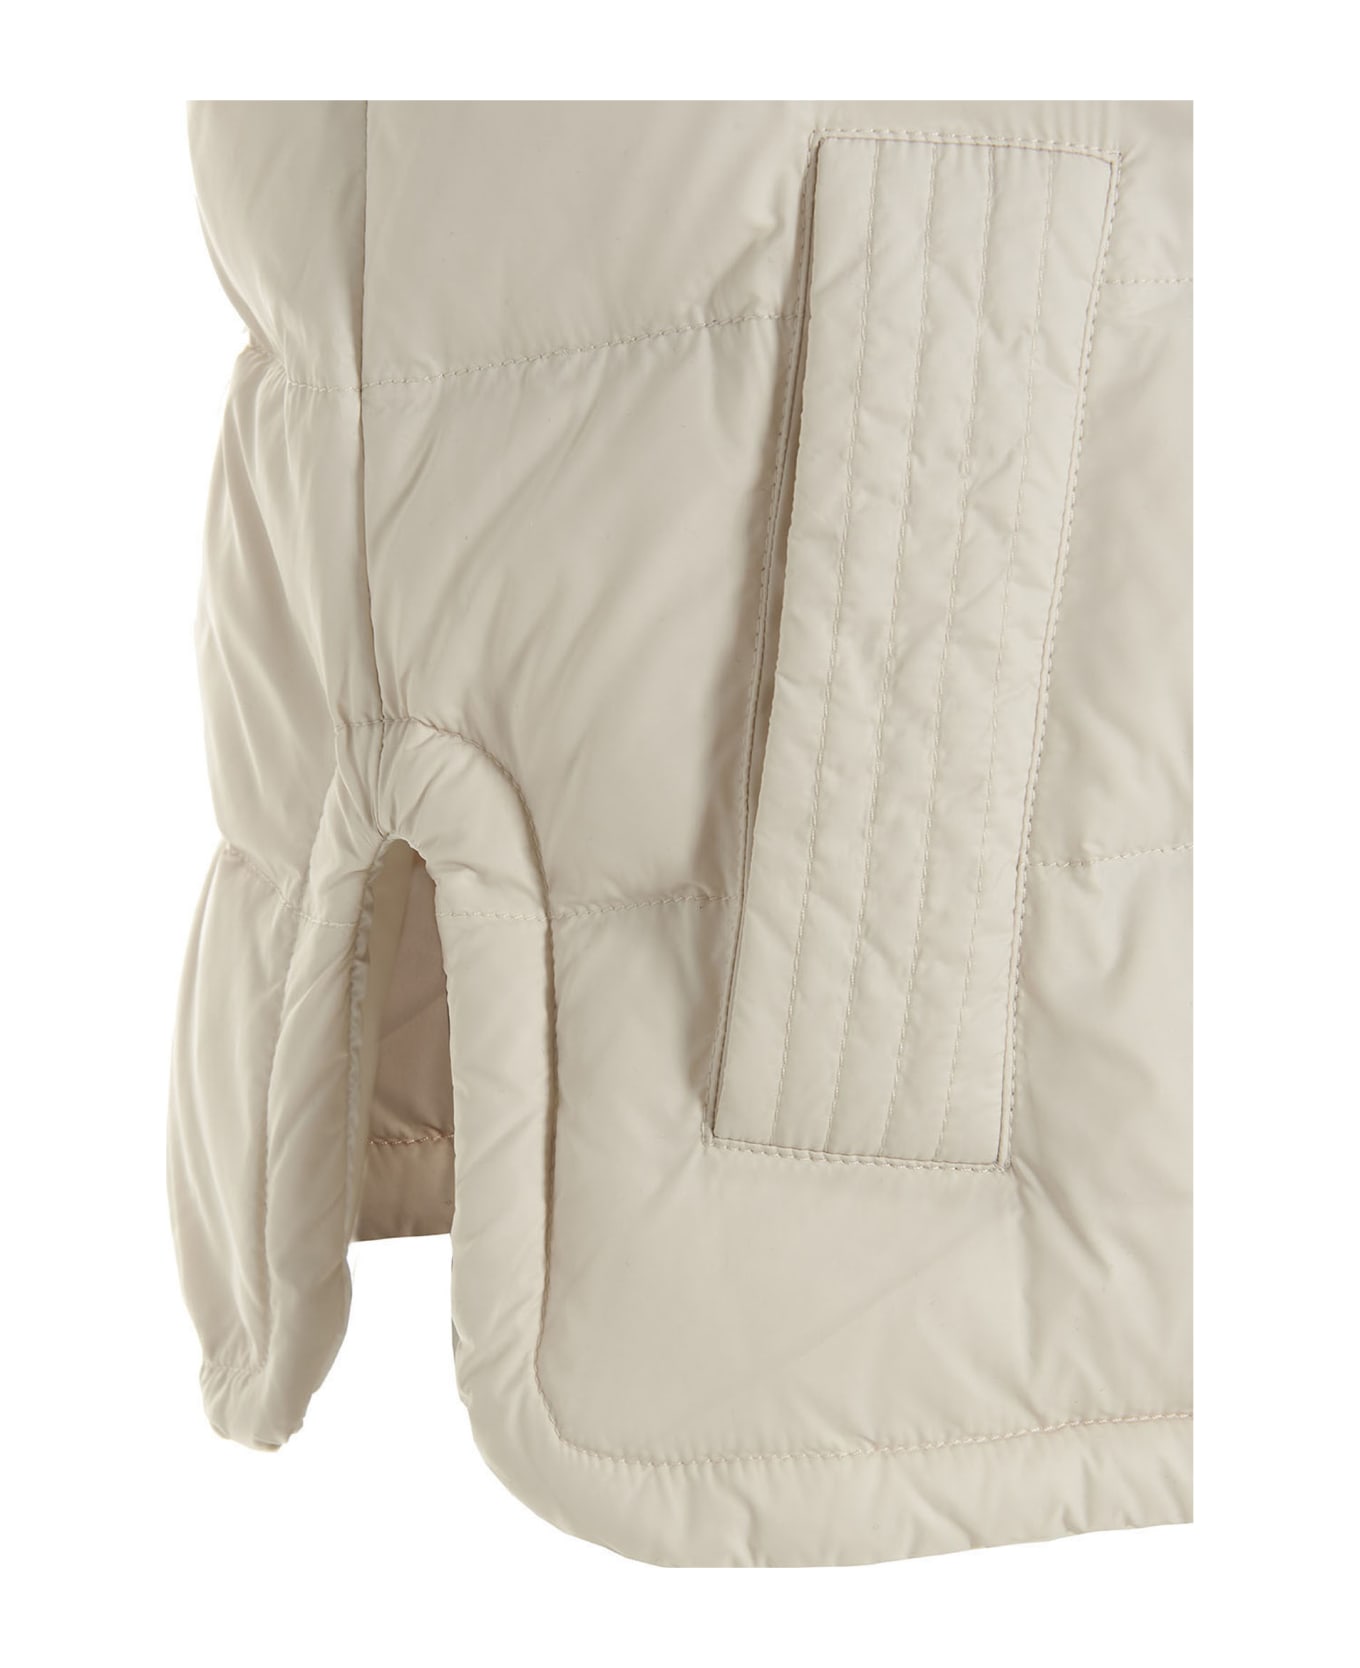 Brunello Cucinelli Sleeveless Down Jacket In Lightweight Nylon With Hood And Rows Of Brilliant Jewels Along The Closure - White